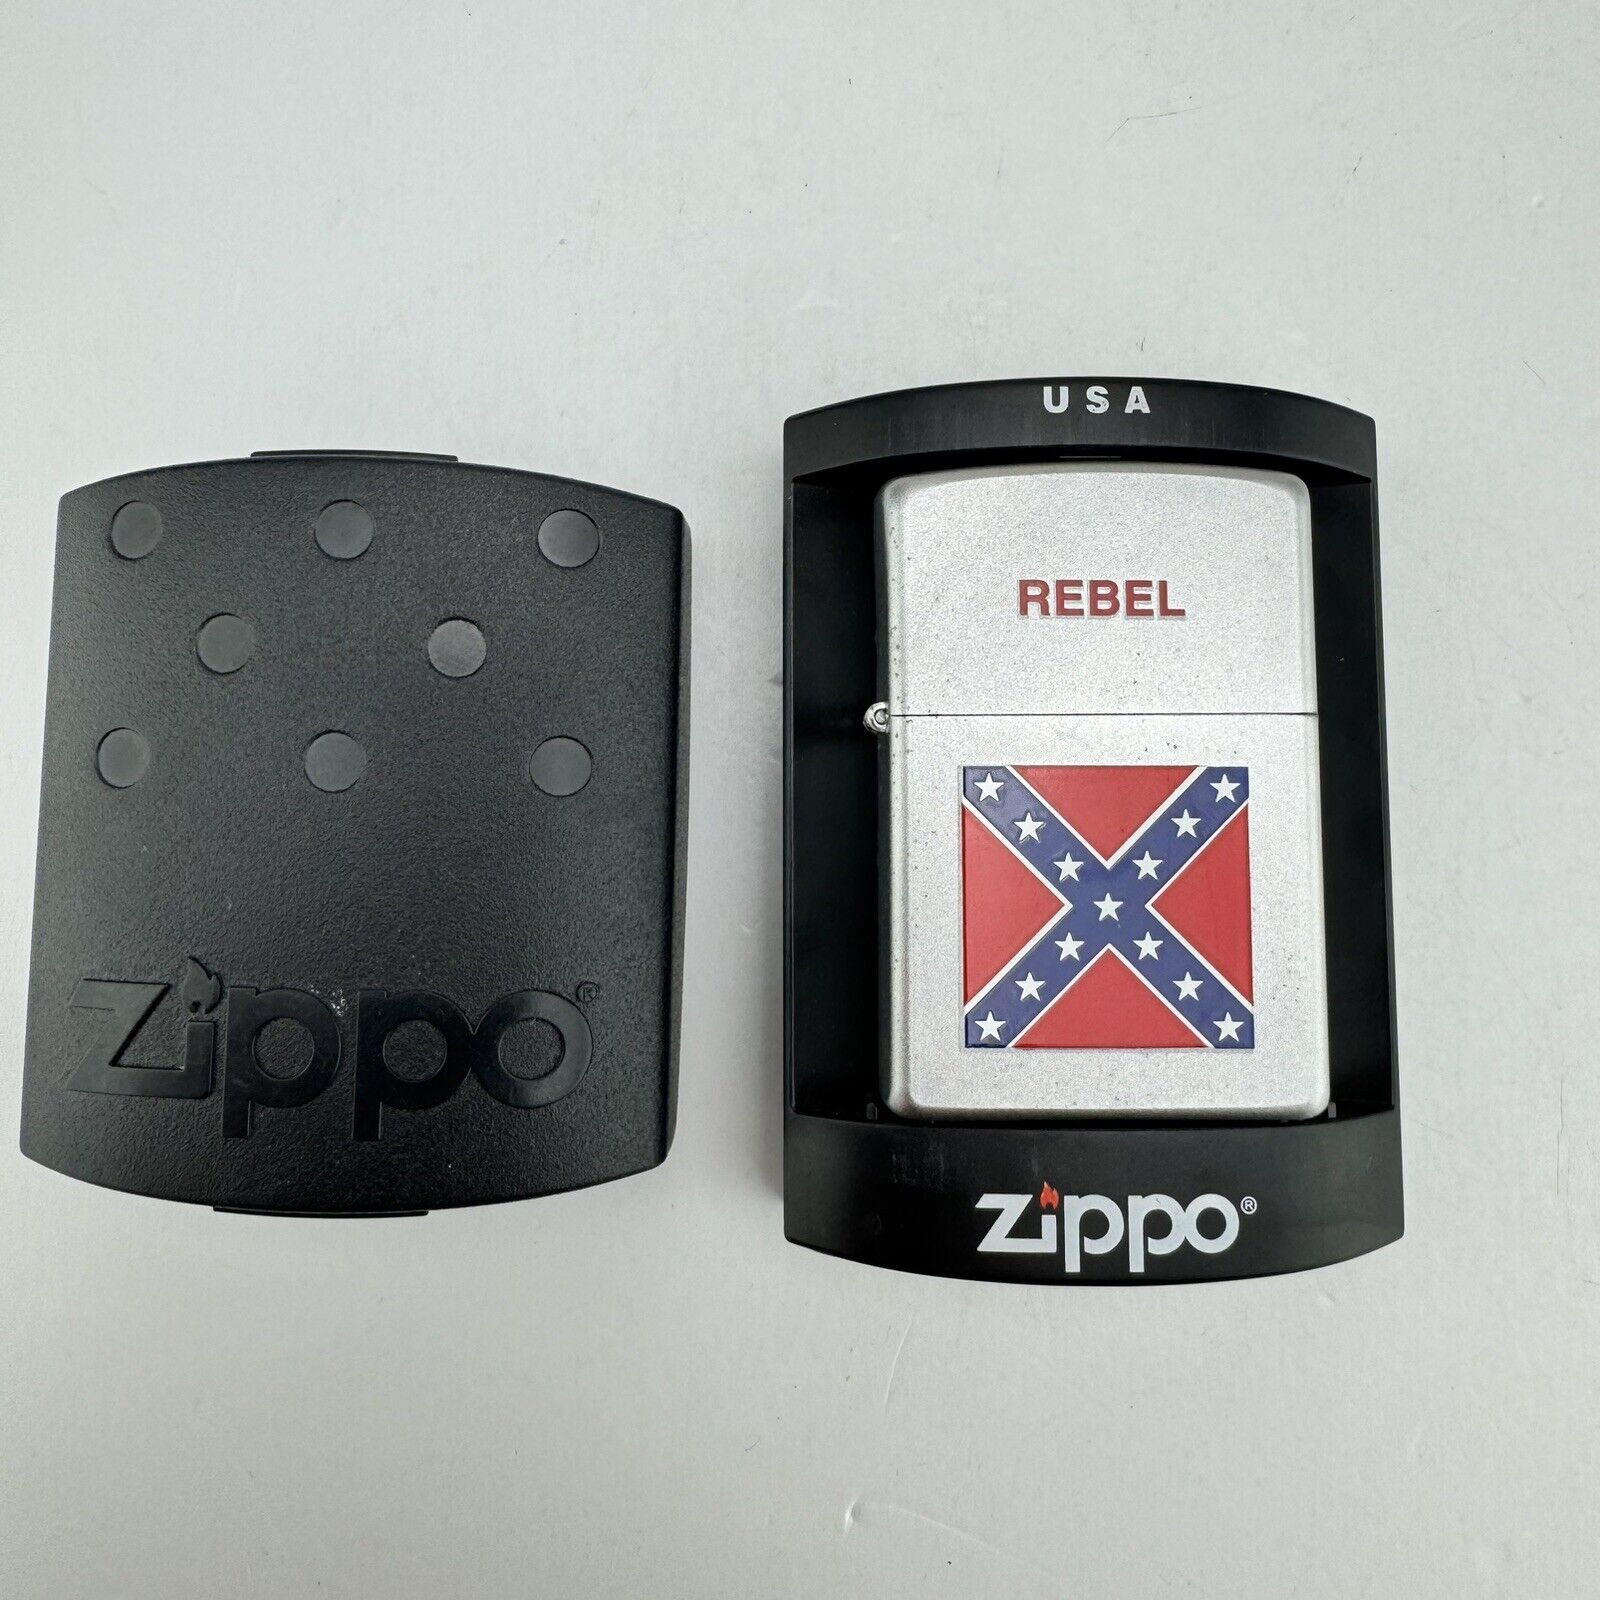 Zippo Lighter #205 Rebel - Made in USA Flag NEW UNUSED with Case